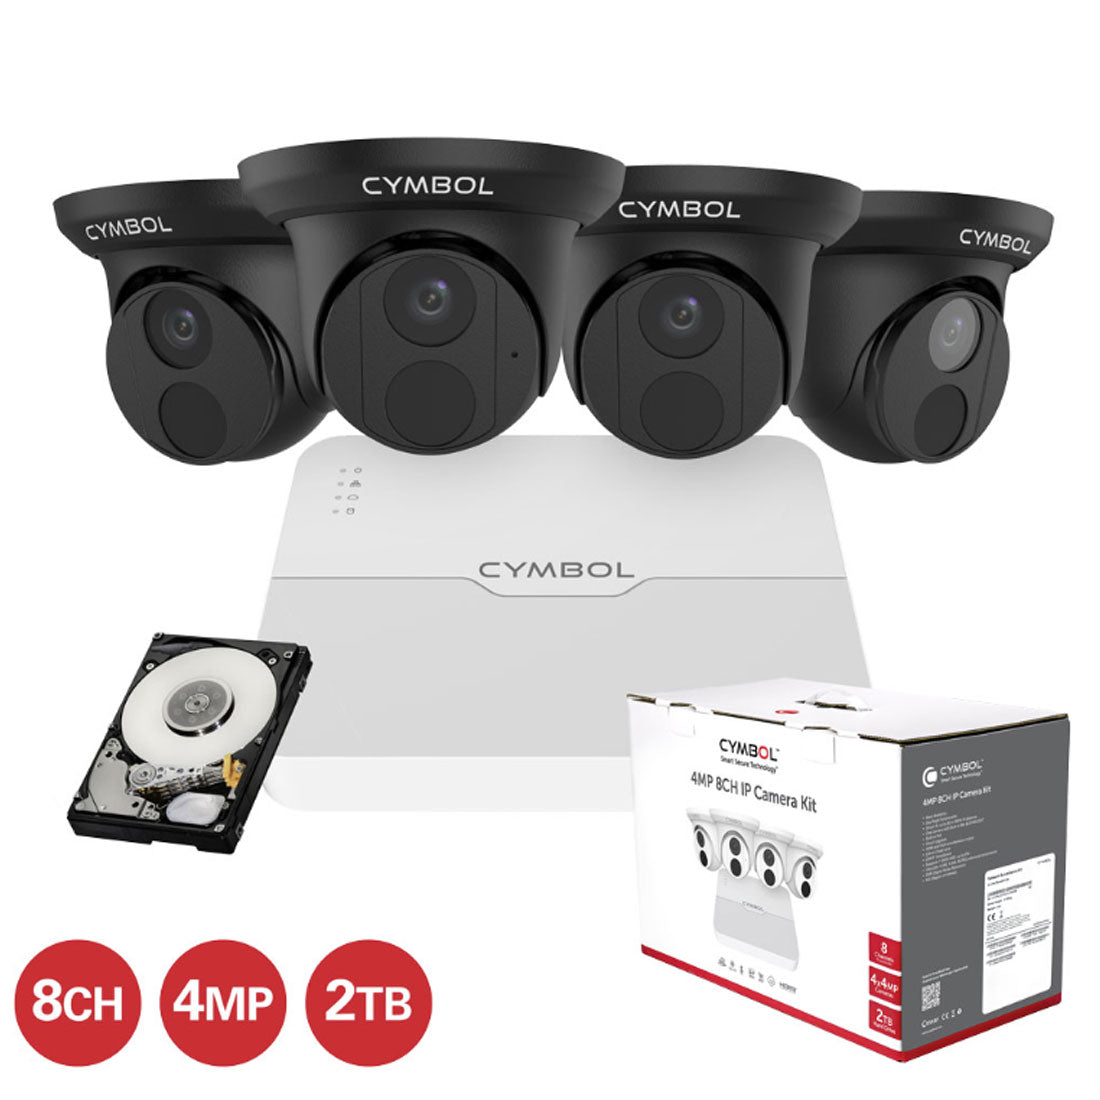 Cymbol 8 Channel IP Camera Kit with 4 x 4MP Black Turret Cameras and 8 Channel 2TB NVR Lite